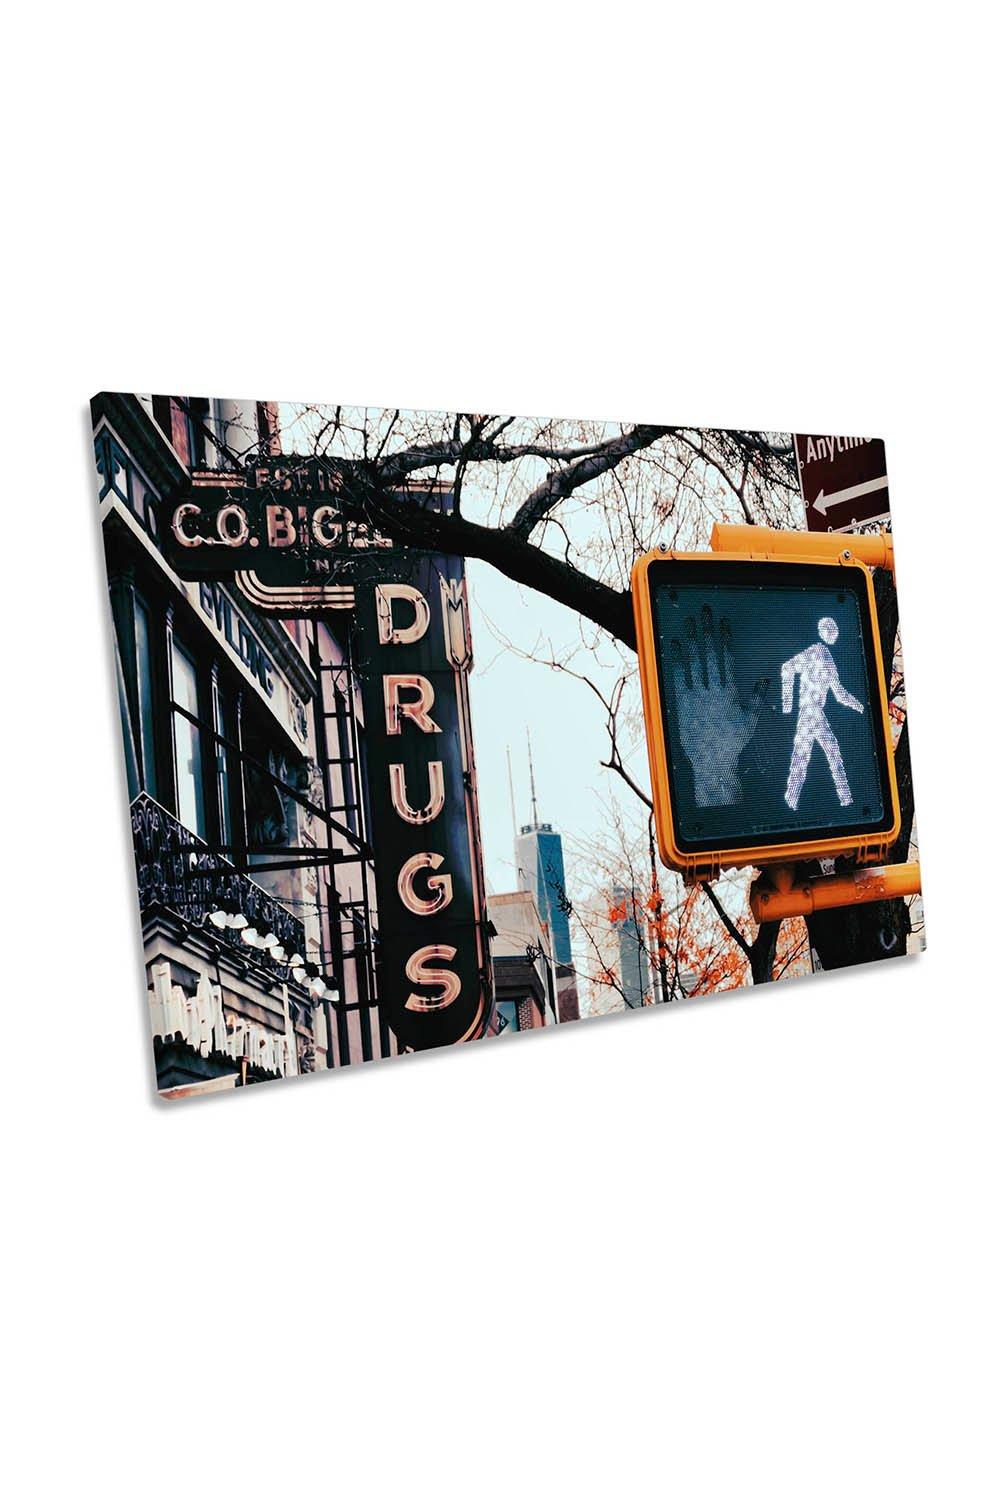 Signs Street City Urban Photography Canvas Wall Art Picture Print